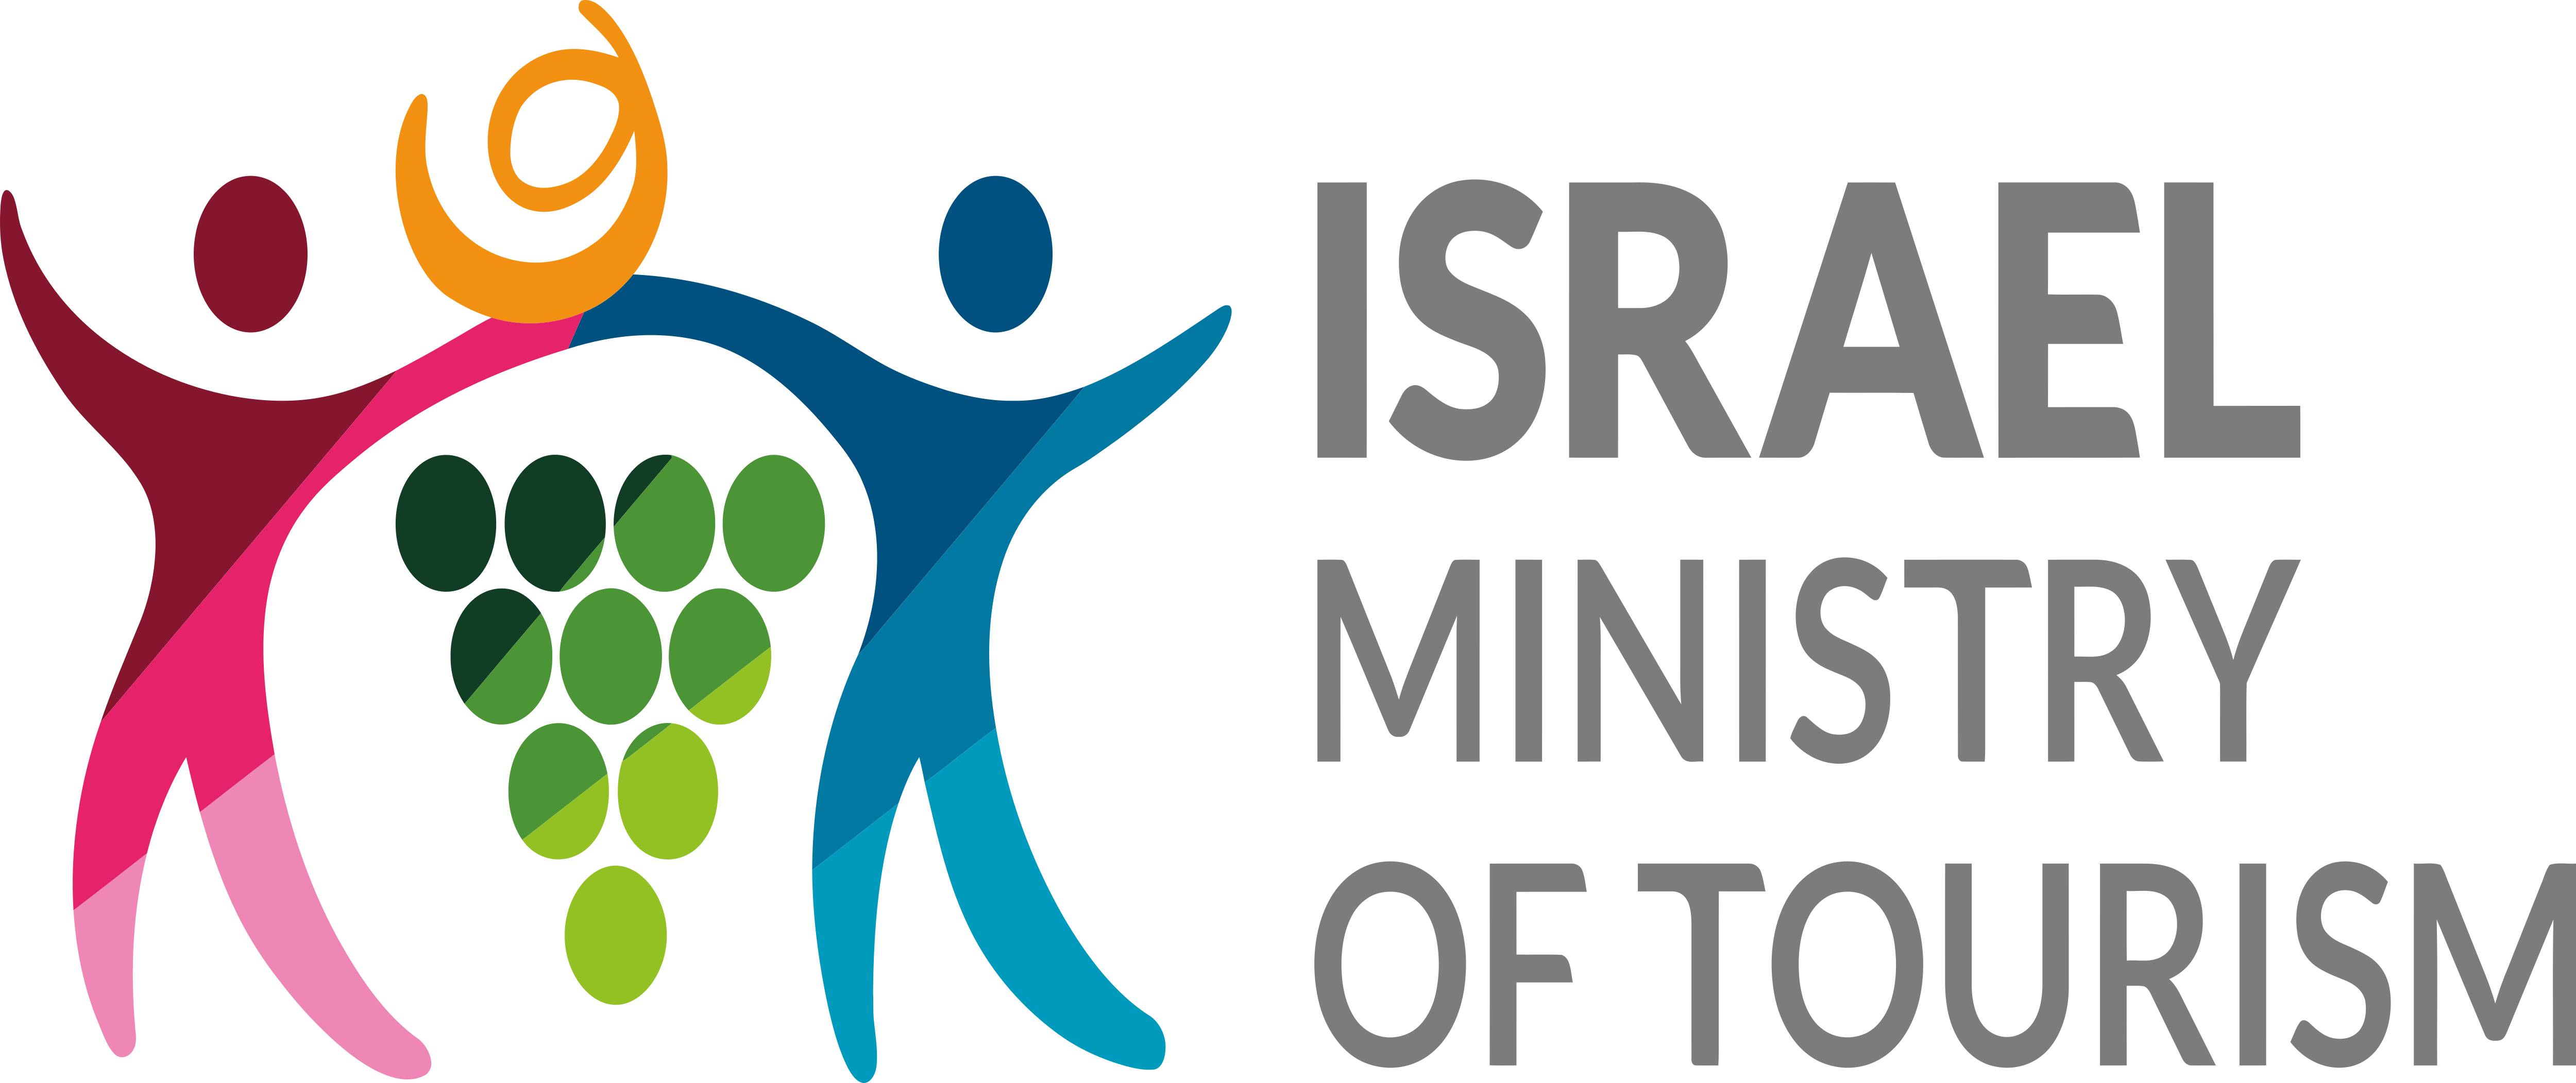 ministry of tourism in israel